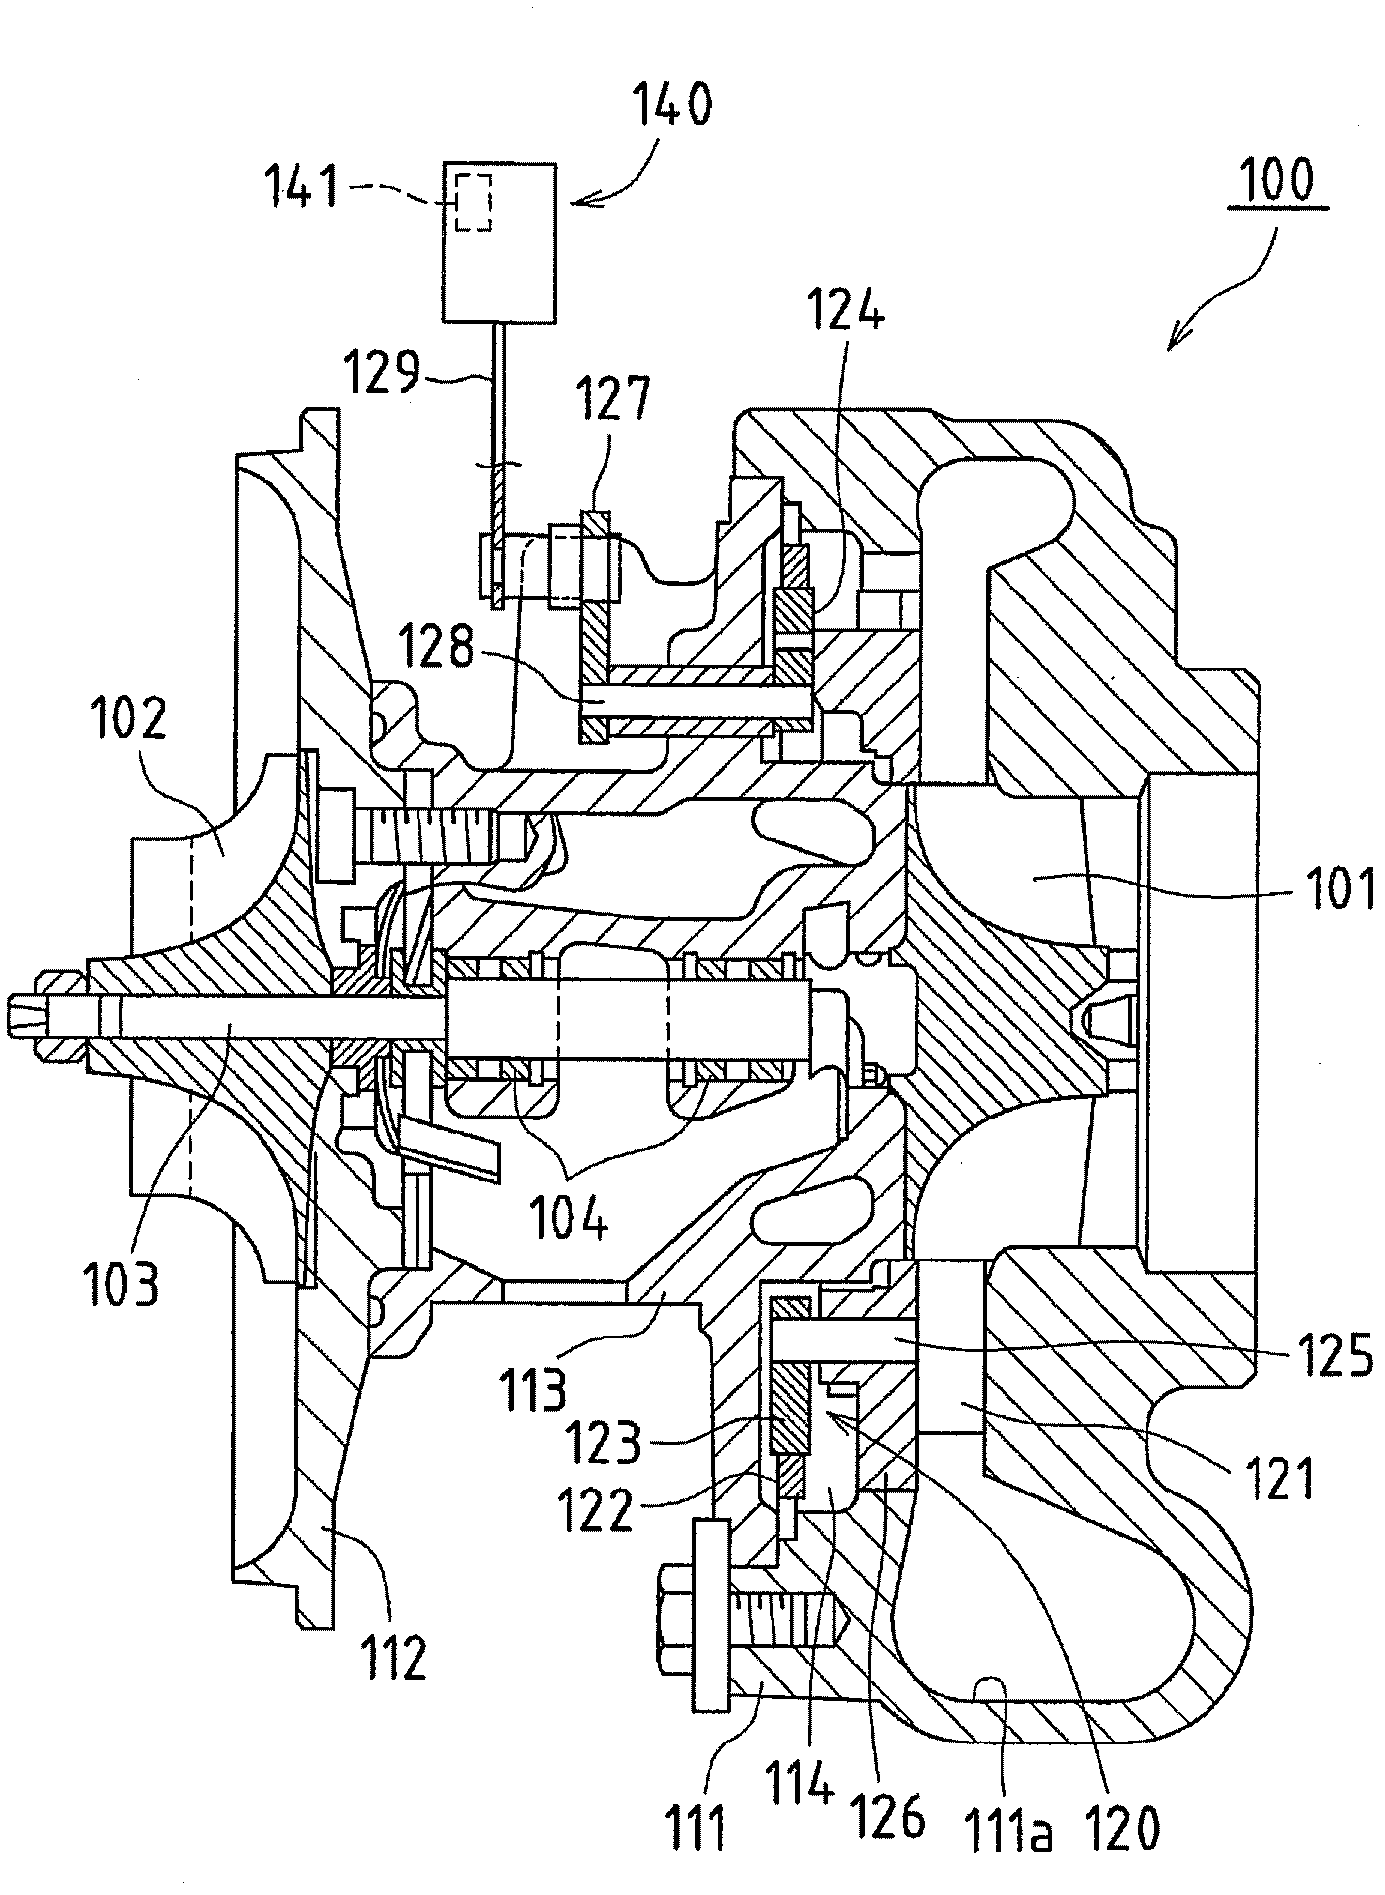 Apparatus for controlling internal combustion engine provided with turbocharger